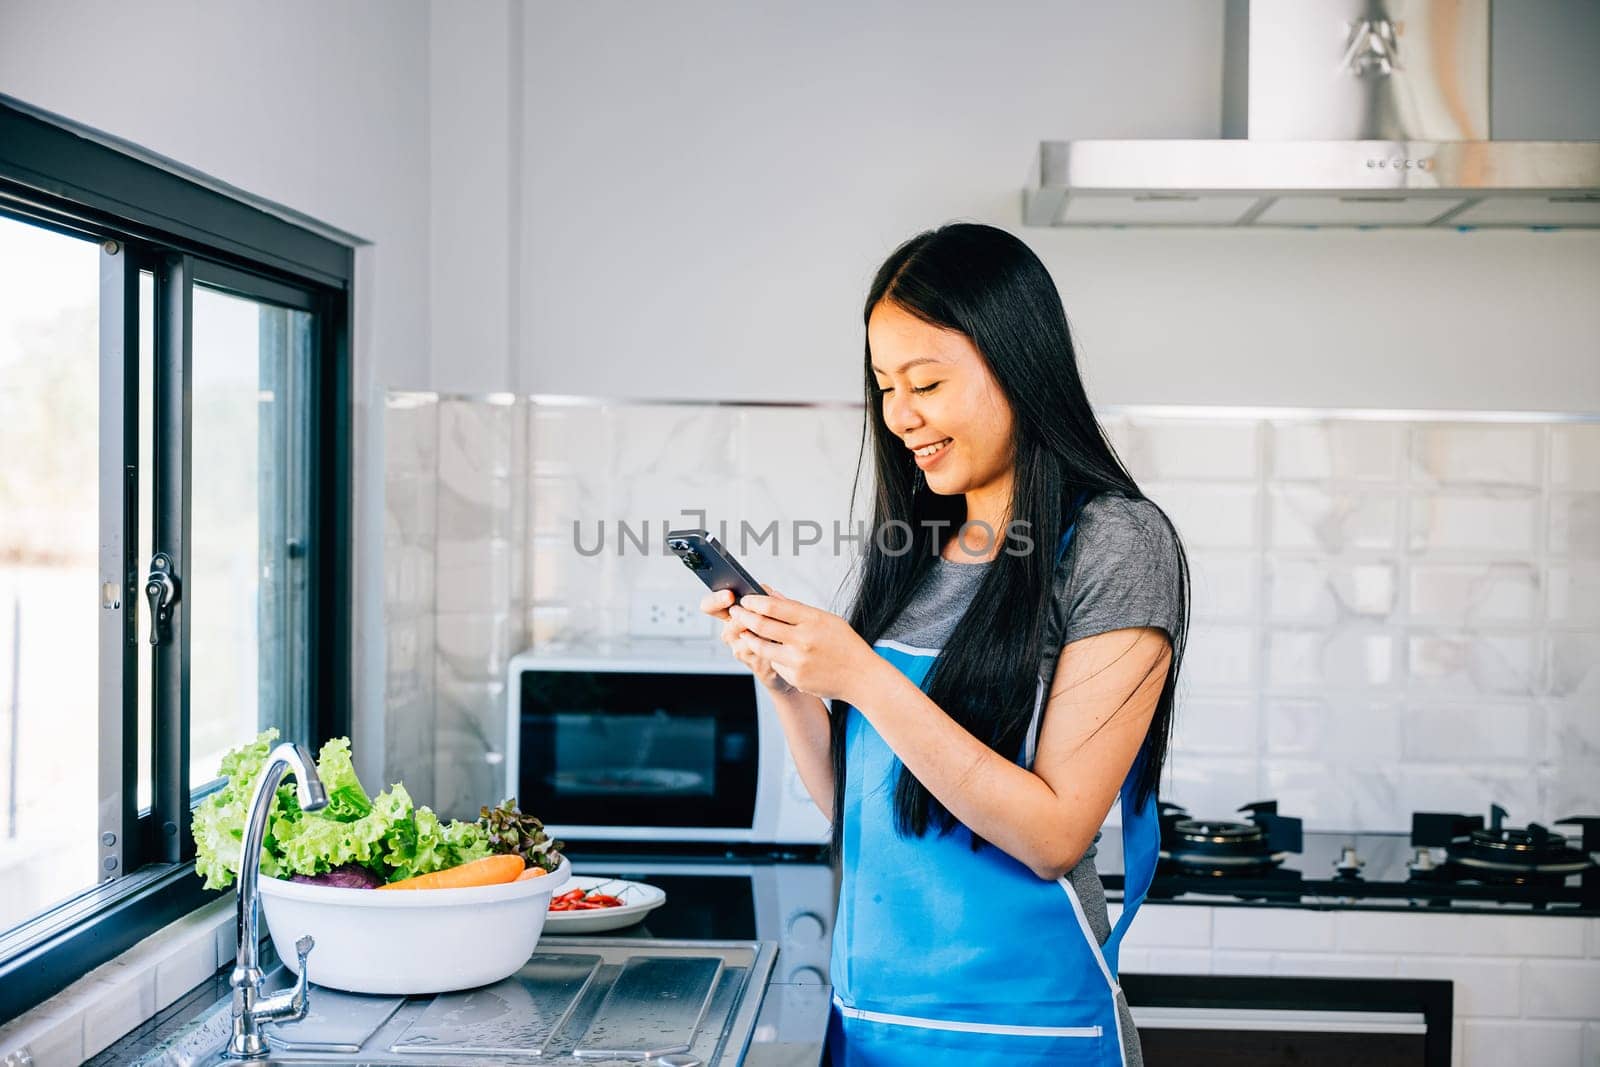 Smiling woman reads messages on her cellphone leaning on the kitchen by Sorapop